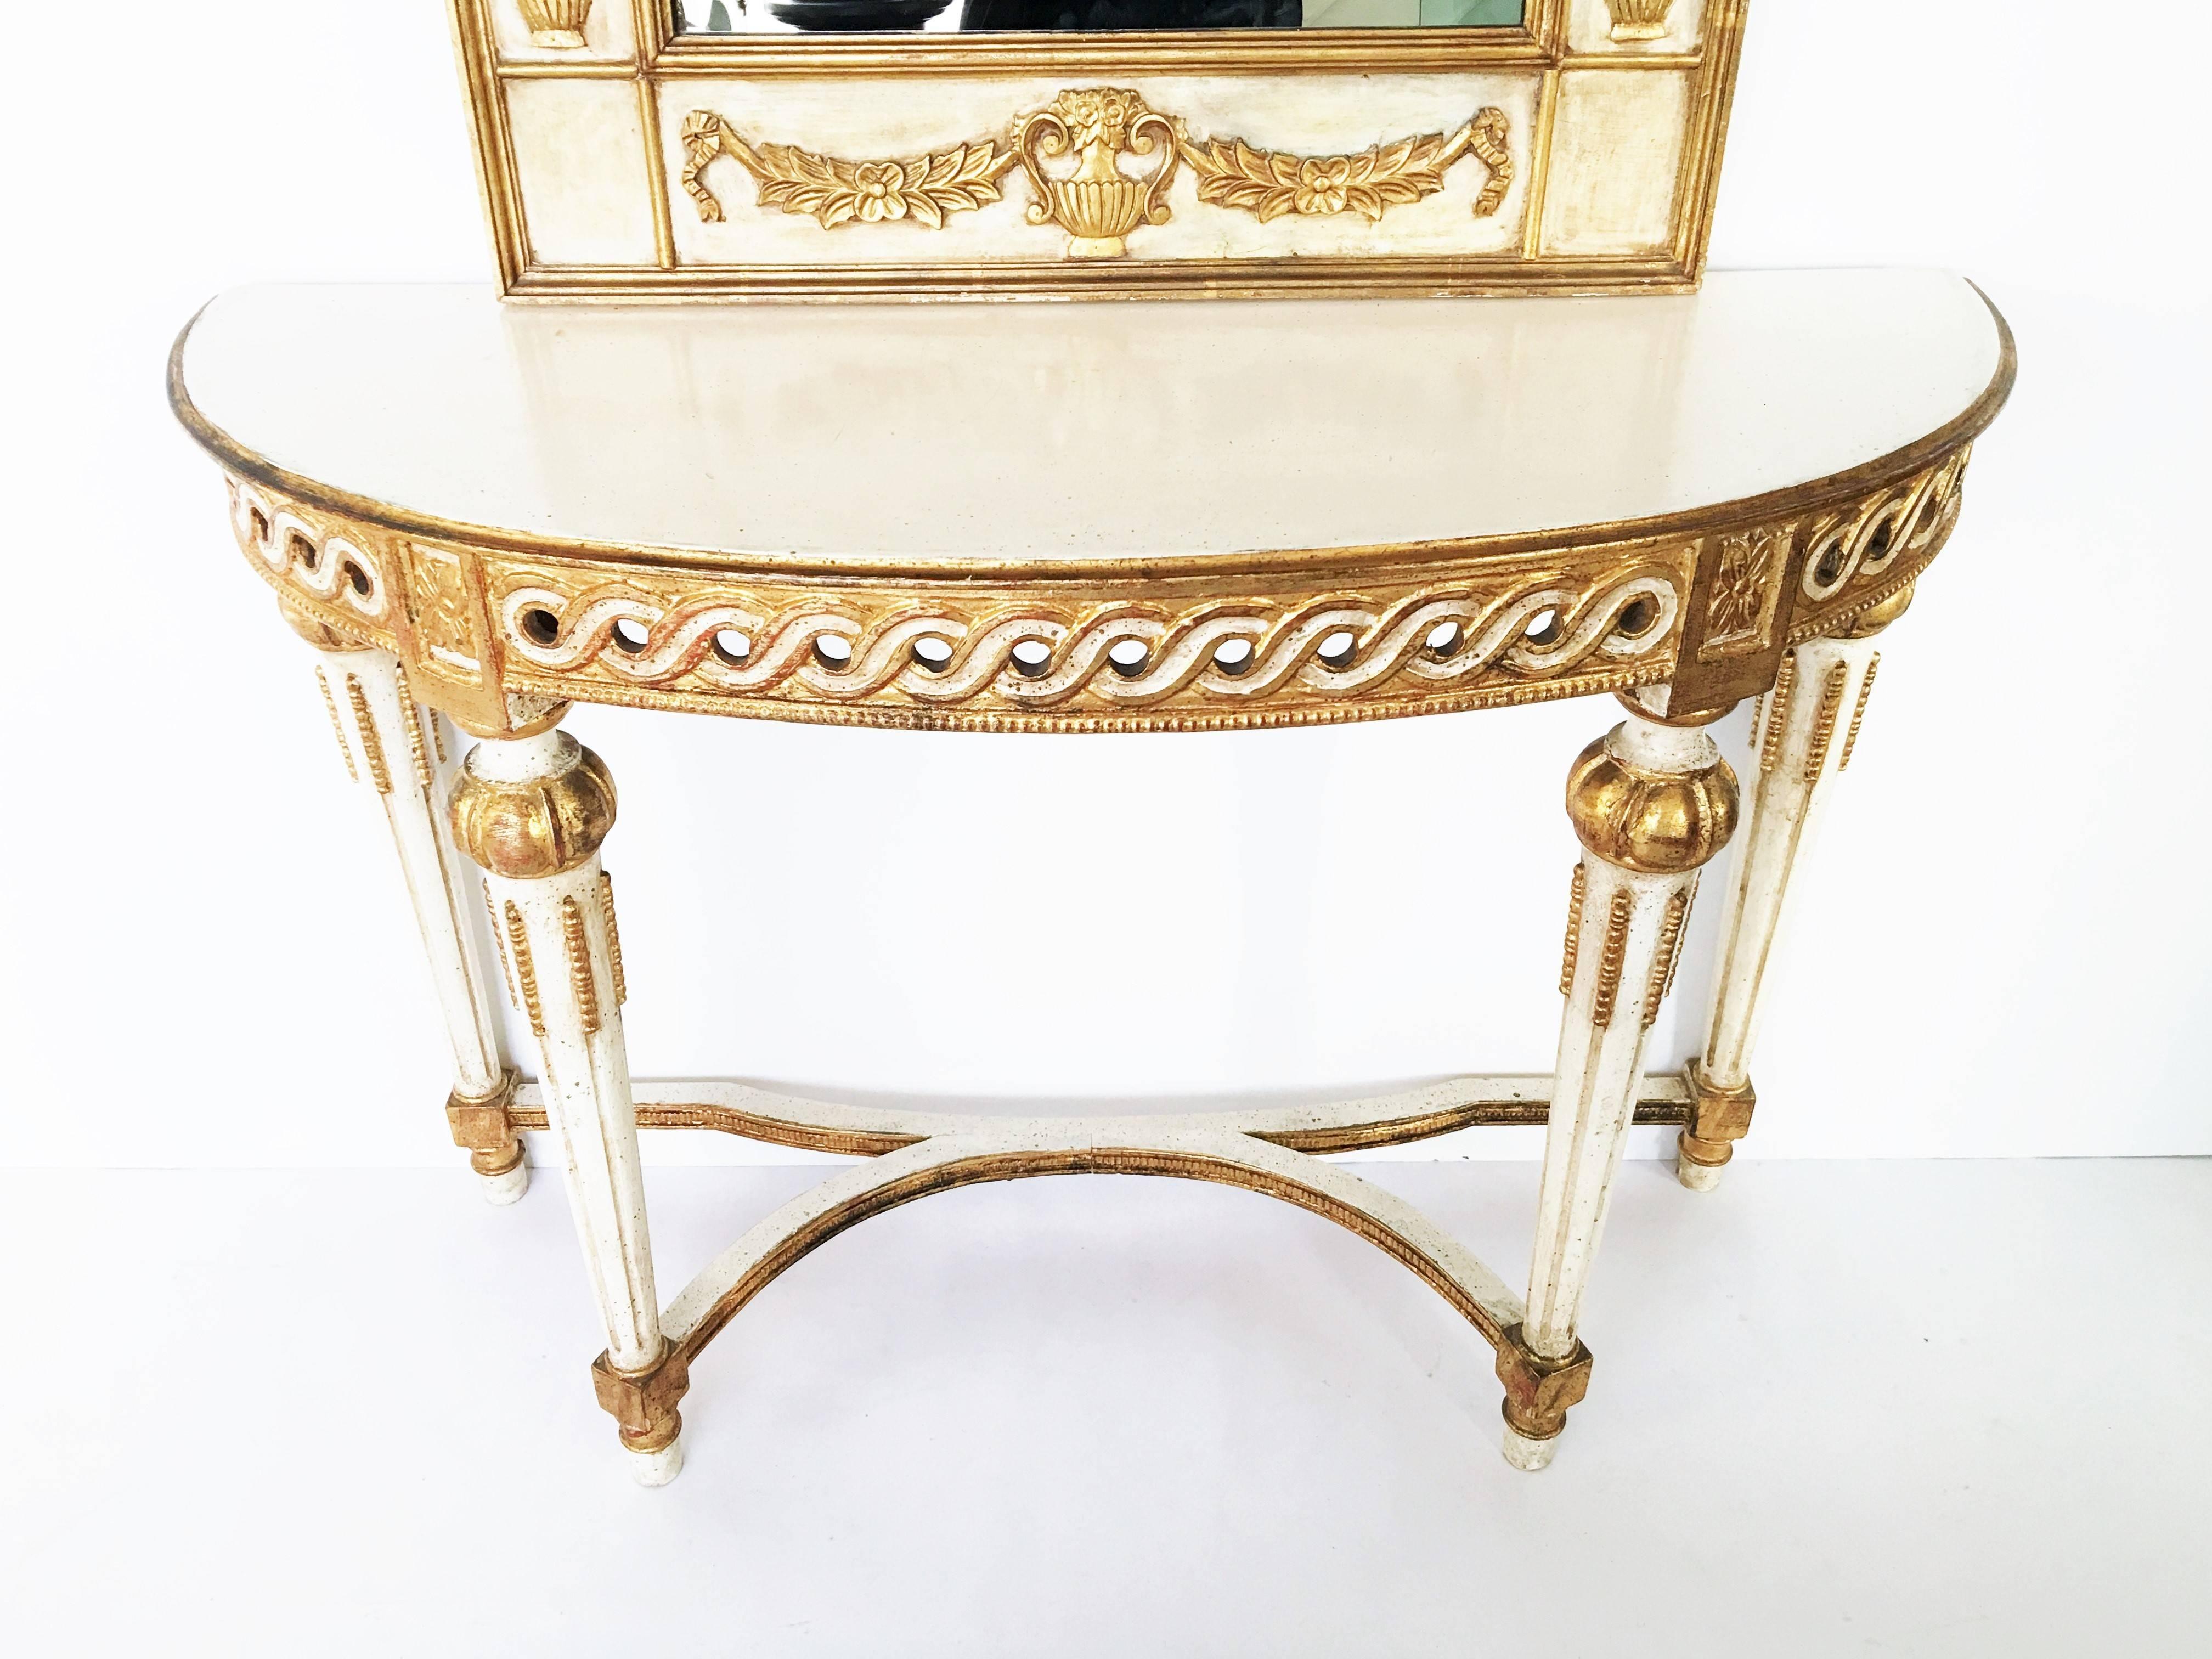 Neoclassical Italian parcel-gilt and painted mirror over console featuring a demilune top over a white painted apron gilt carved with a patterned frieze representing a vitruvian scroll and rosettes on tapered fluted legs. The mirror, exhibiting gilt